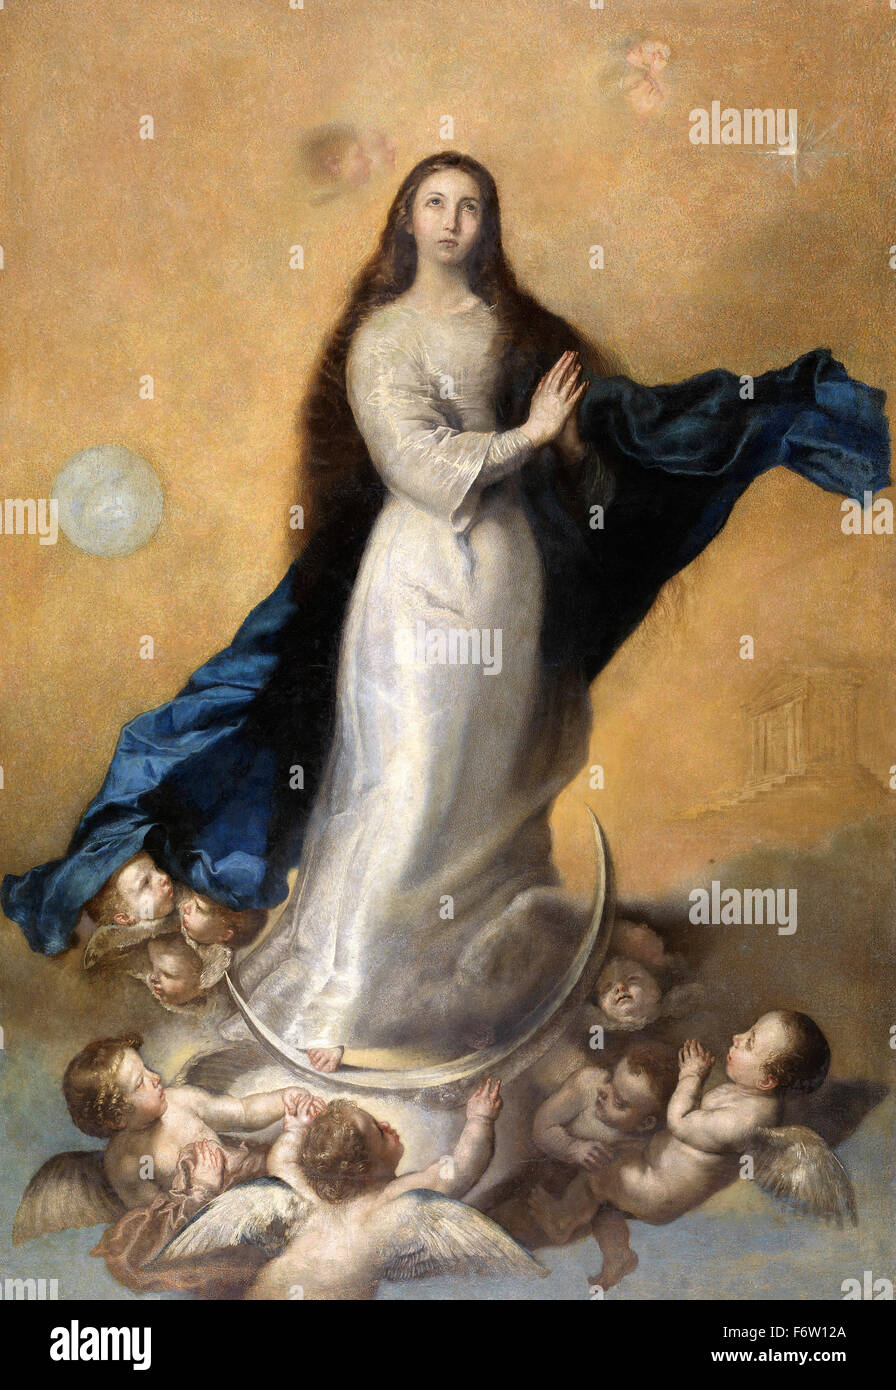 Jusepe de Ribera - The Immaculate Conception Stock Photo